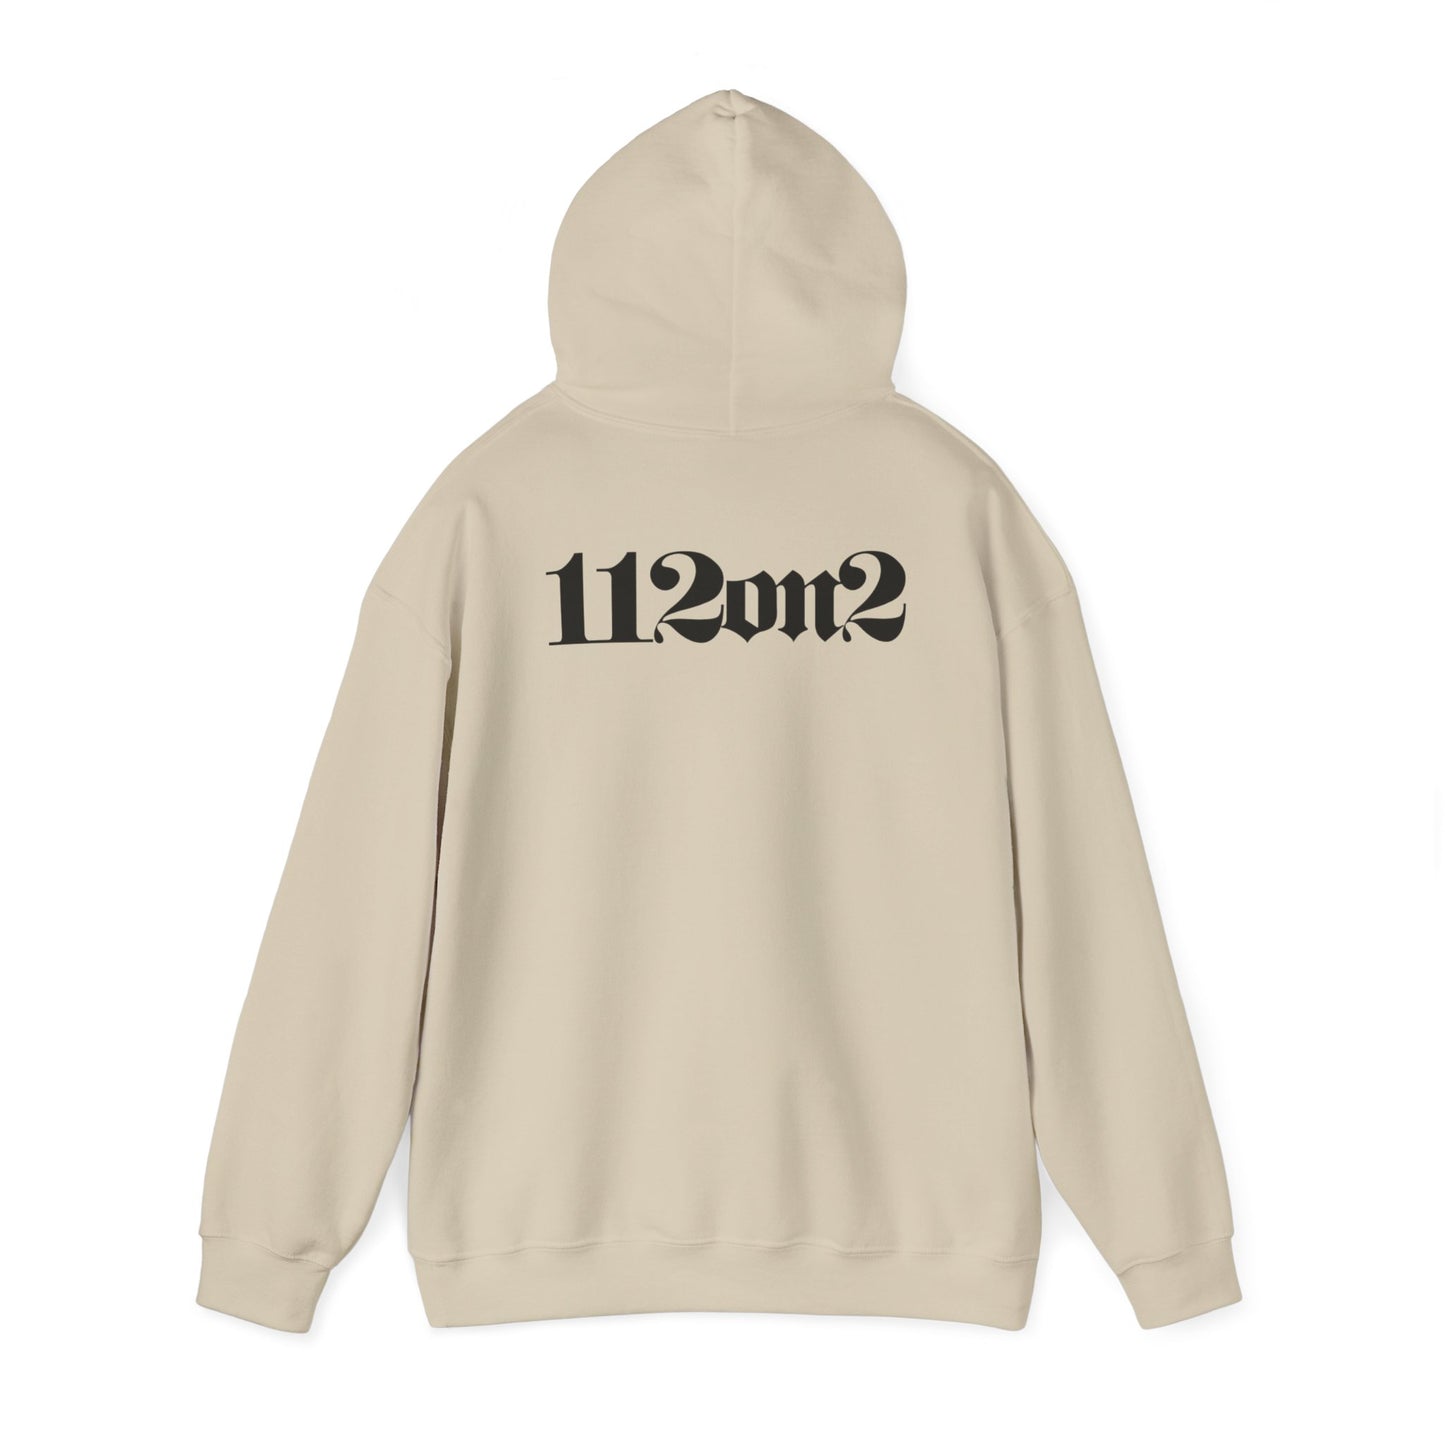 112on2 Hoodie Gothic